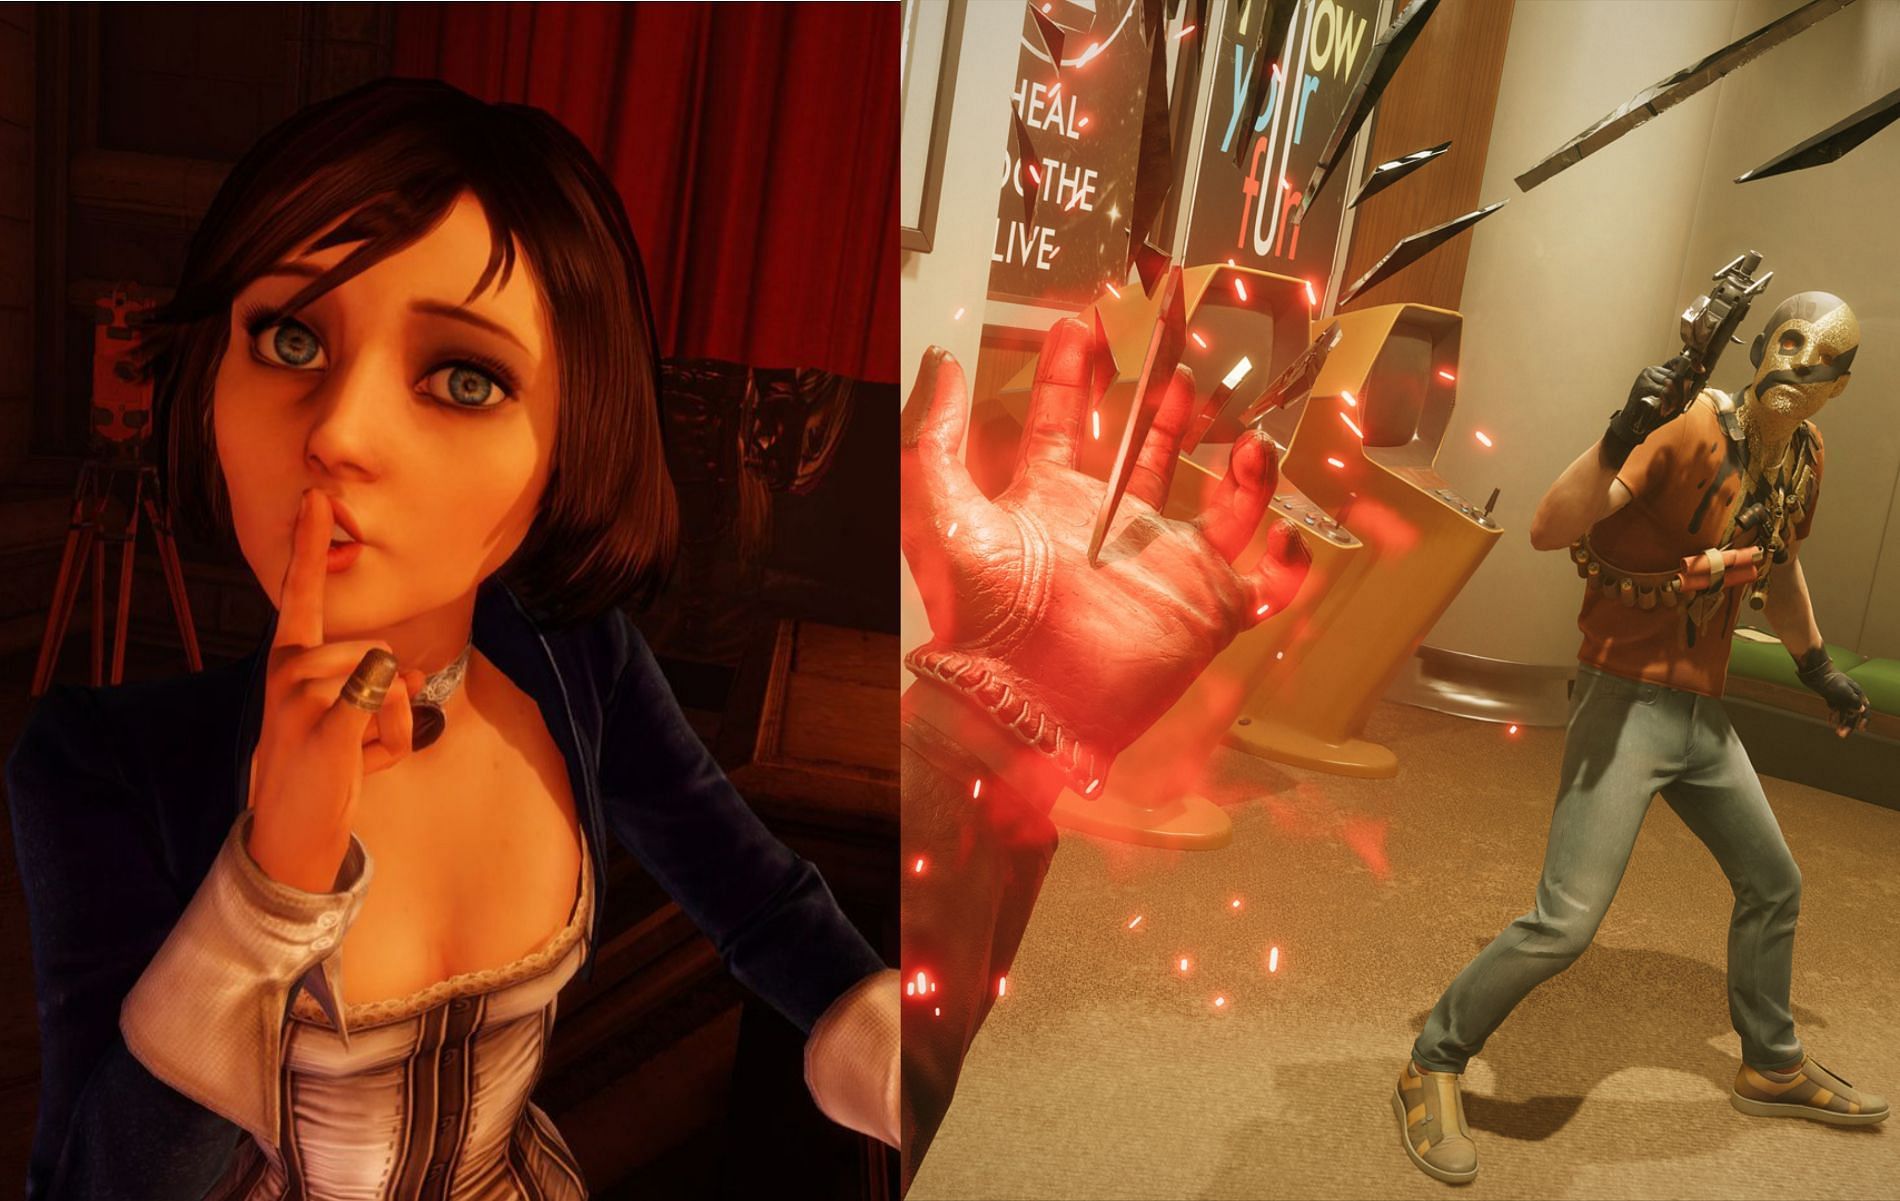 Bioshock 4 is reportedly inspired by Deathloop (Images by 2K and Bethesda)